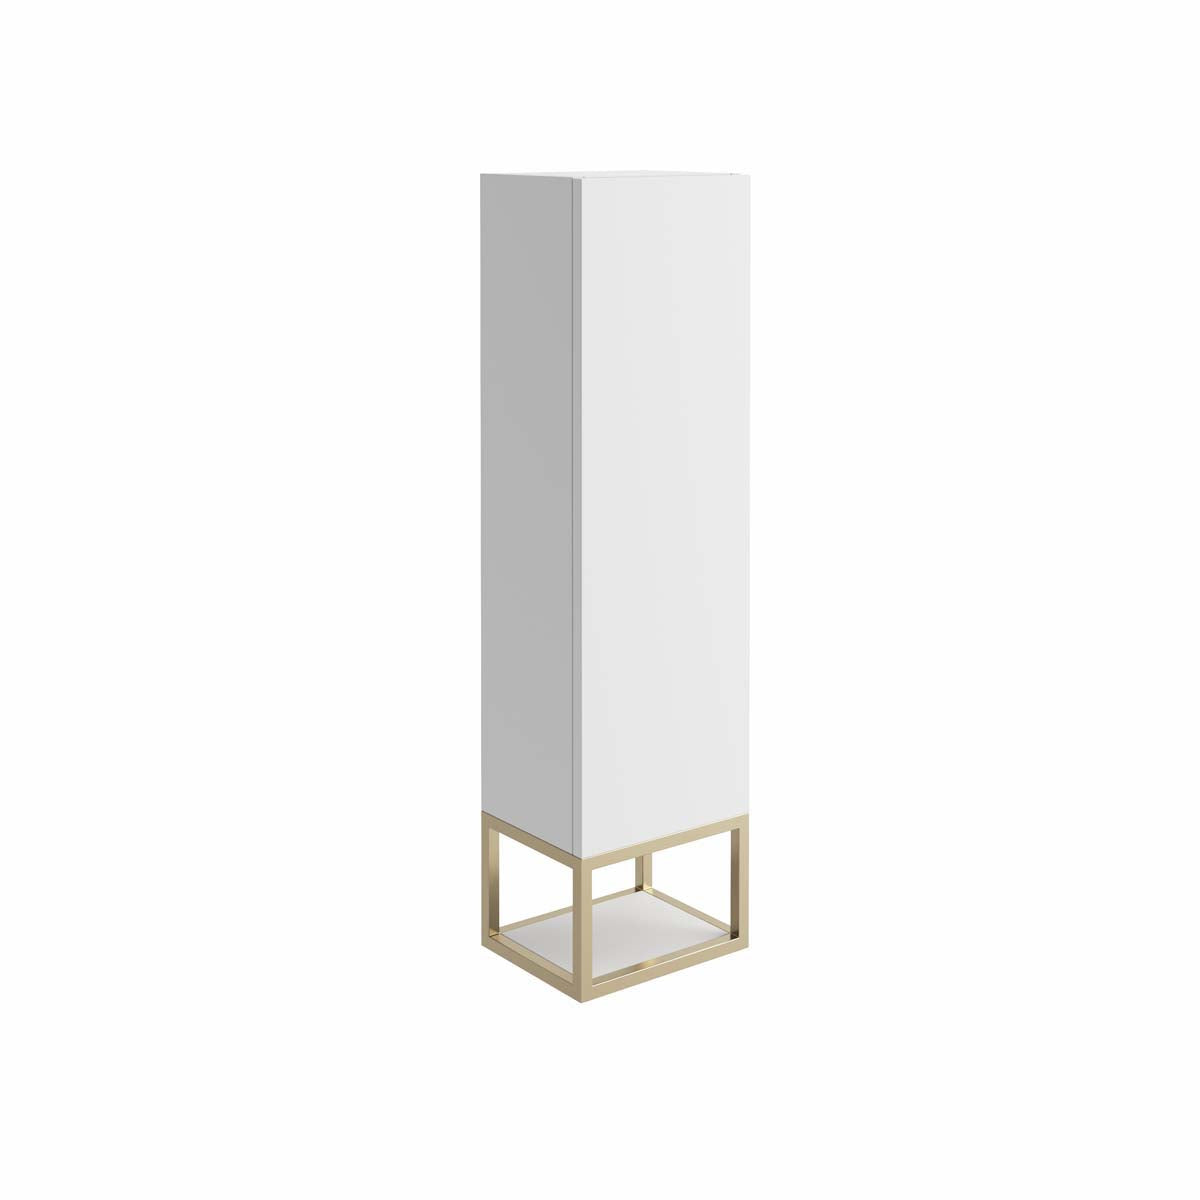 Ambience Brushed Brass Frame with White Shelf